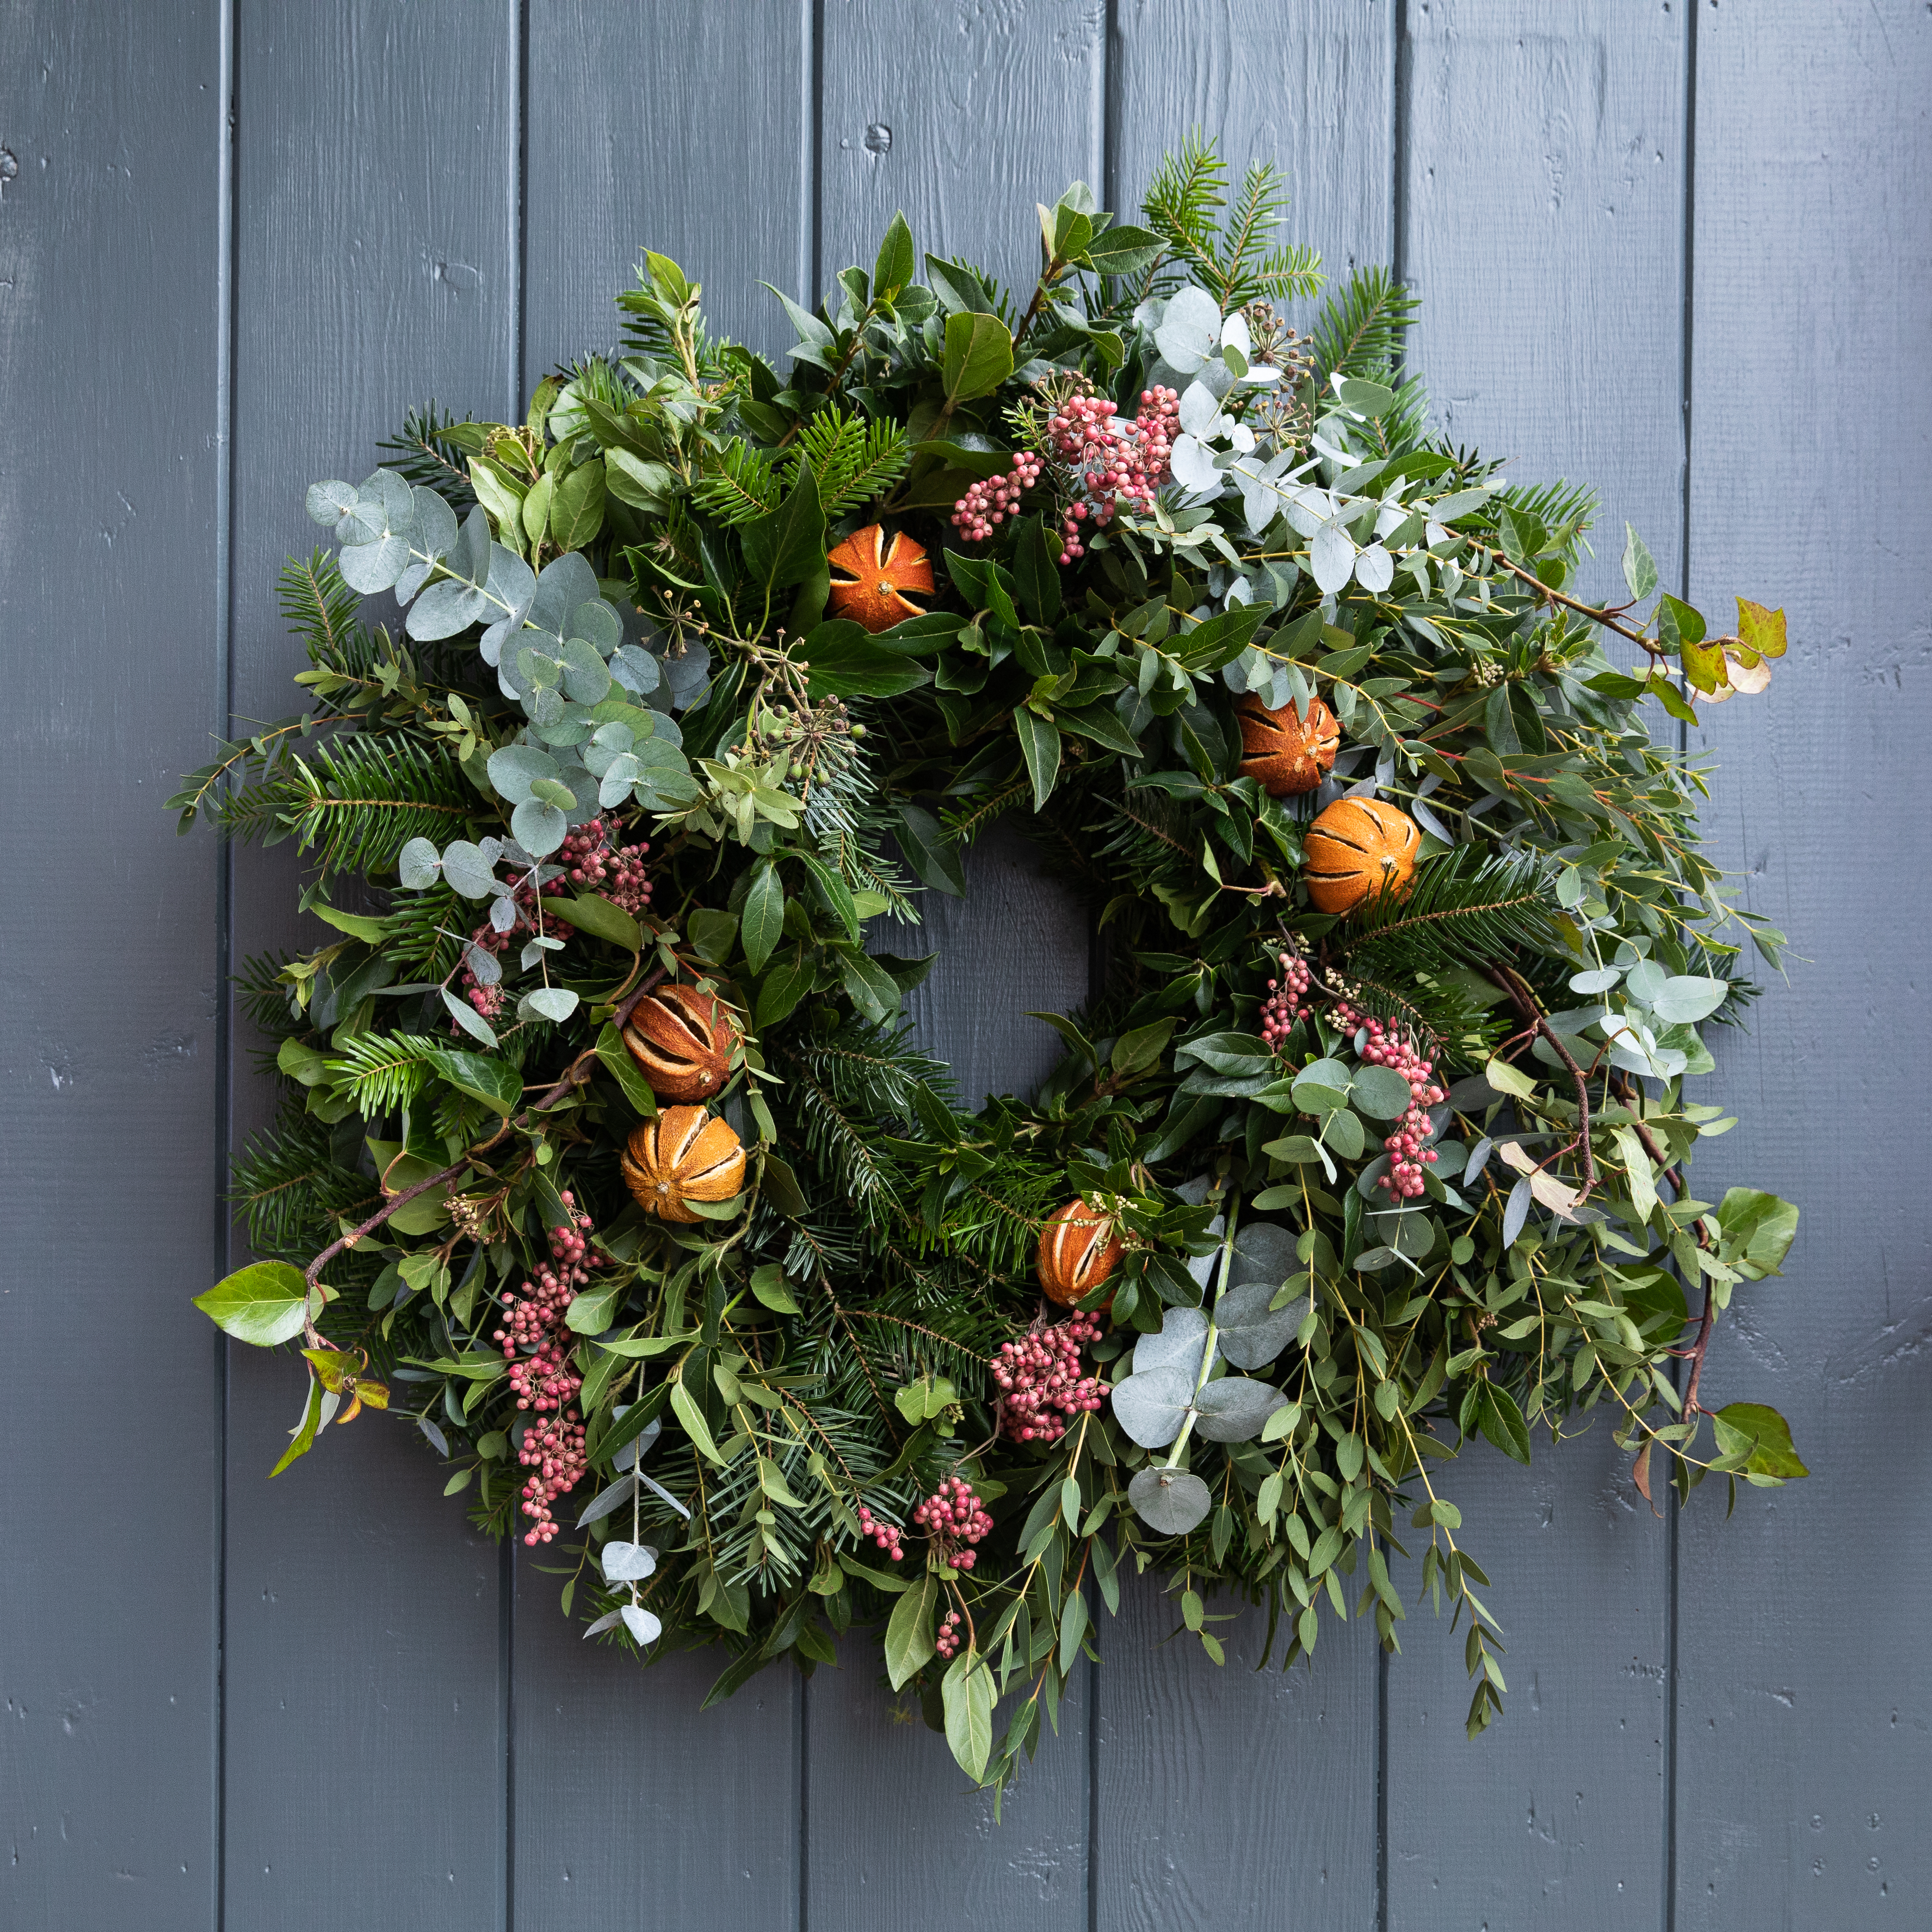 How to Choose the Right Size Wreath for Your Door